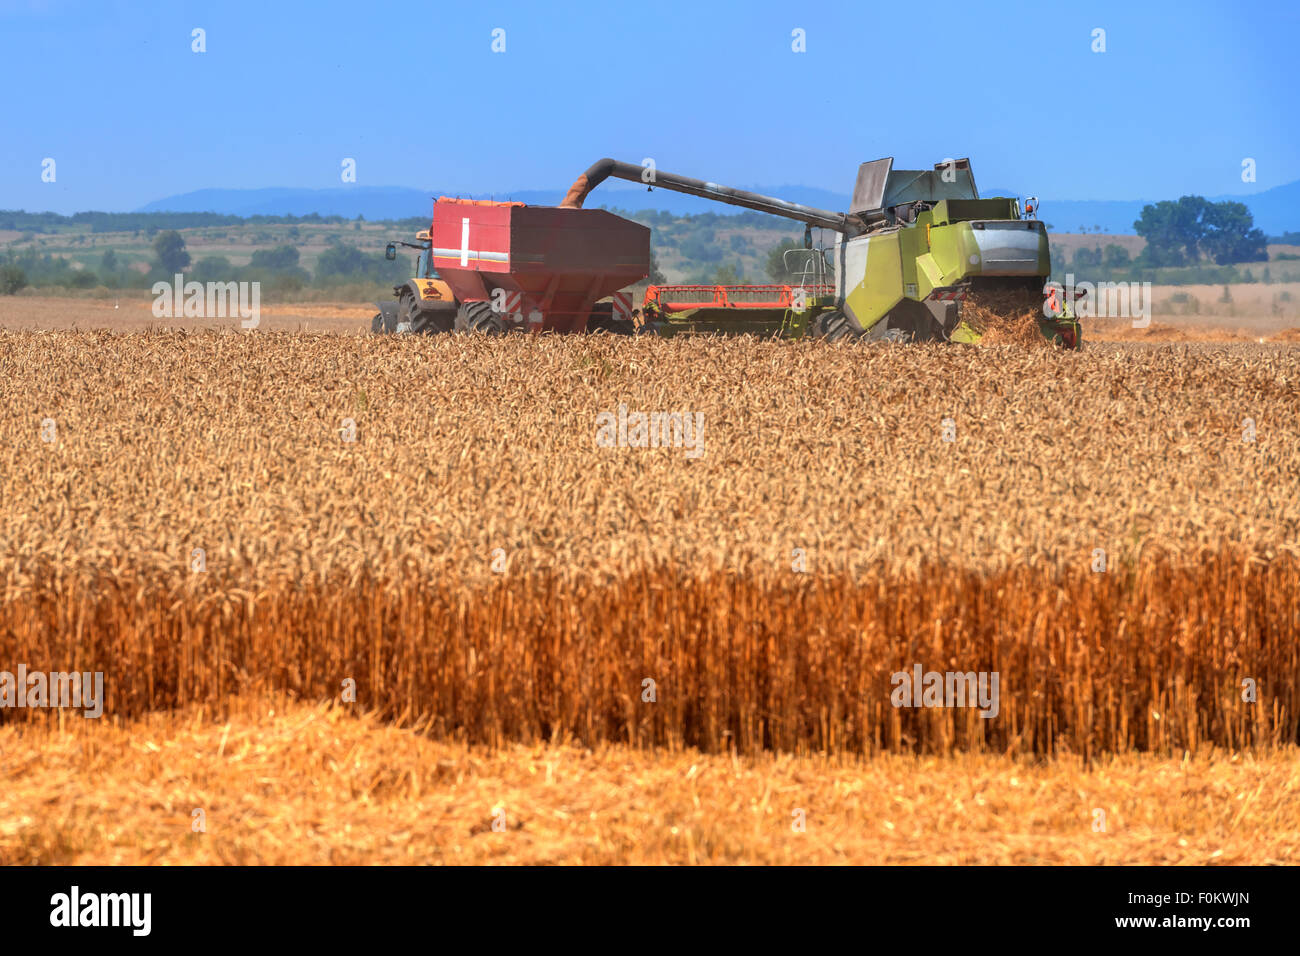 Amazing rural scene on autumn field with harvester and birds. Stock Photo